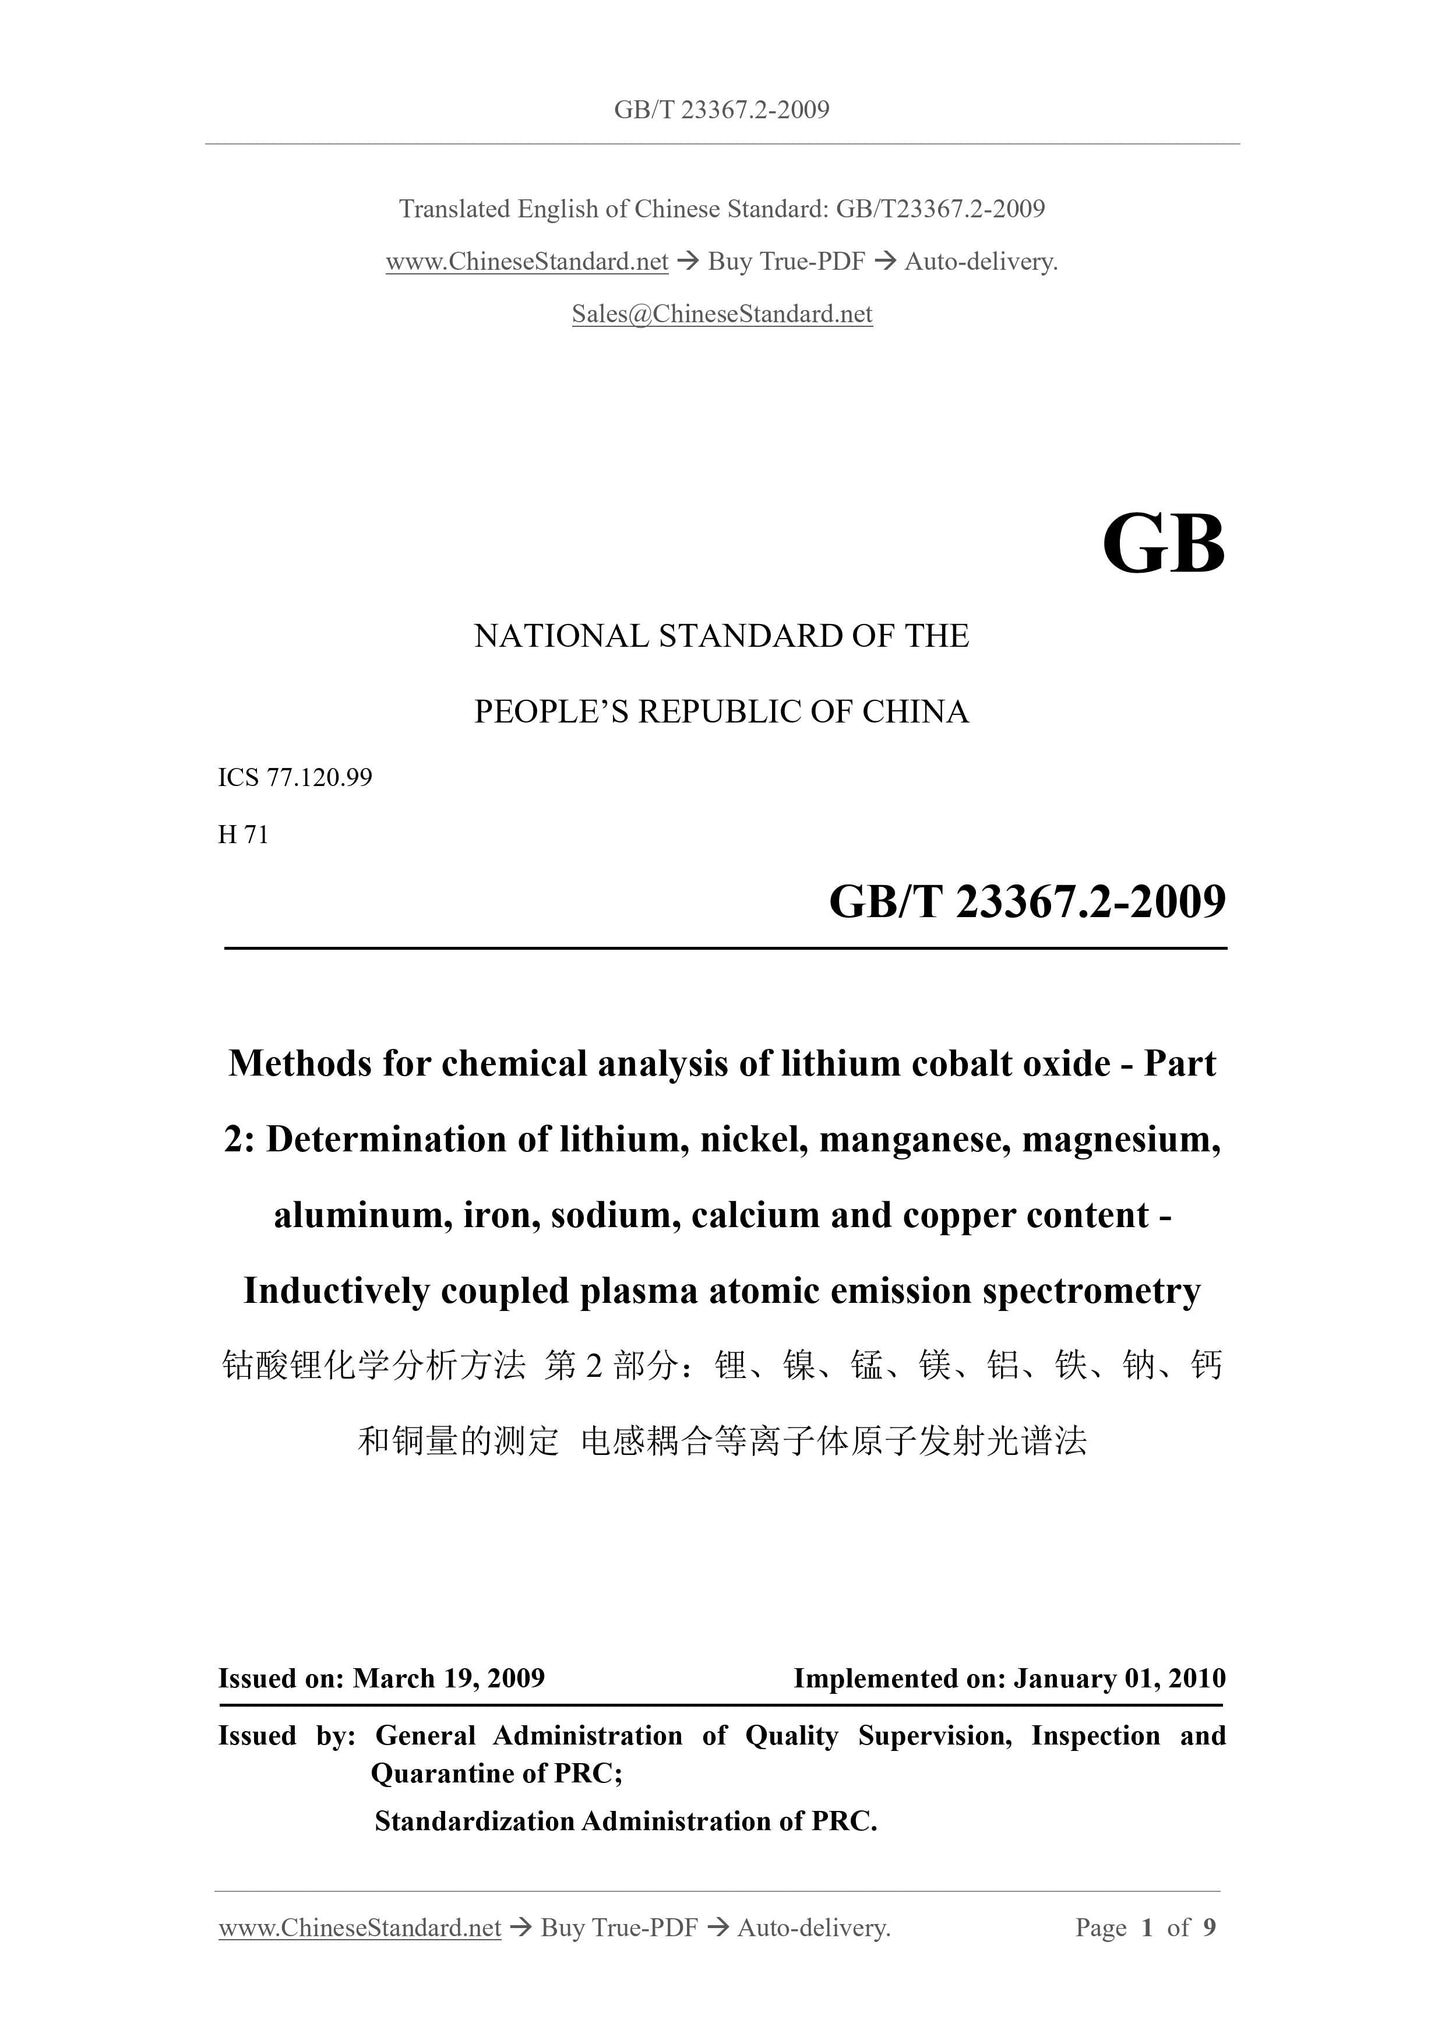 GB/T 23367.2-2009 Page 1